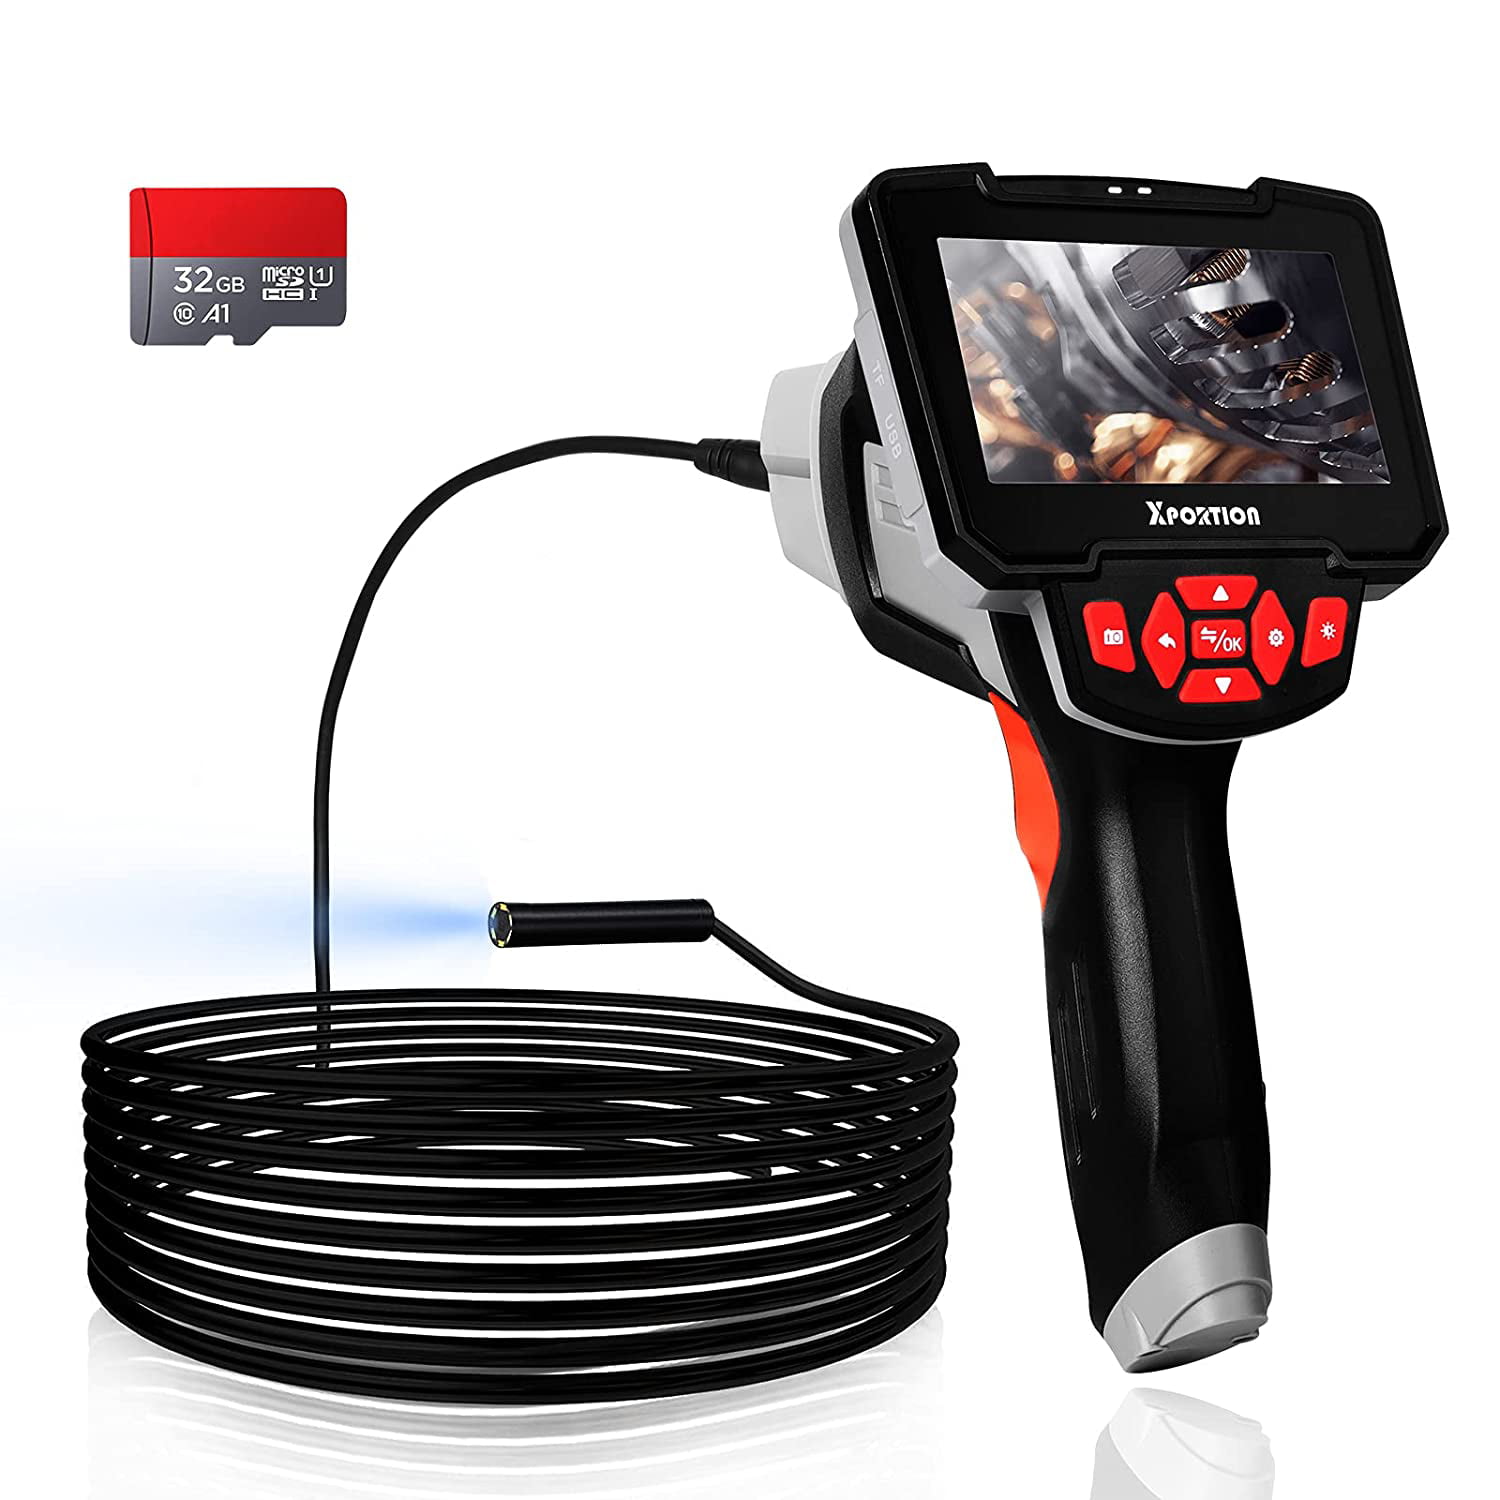 Borescope 4.3 Inch Industrial LCD Display Screen Endoscope Handheld for Car Inspection 